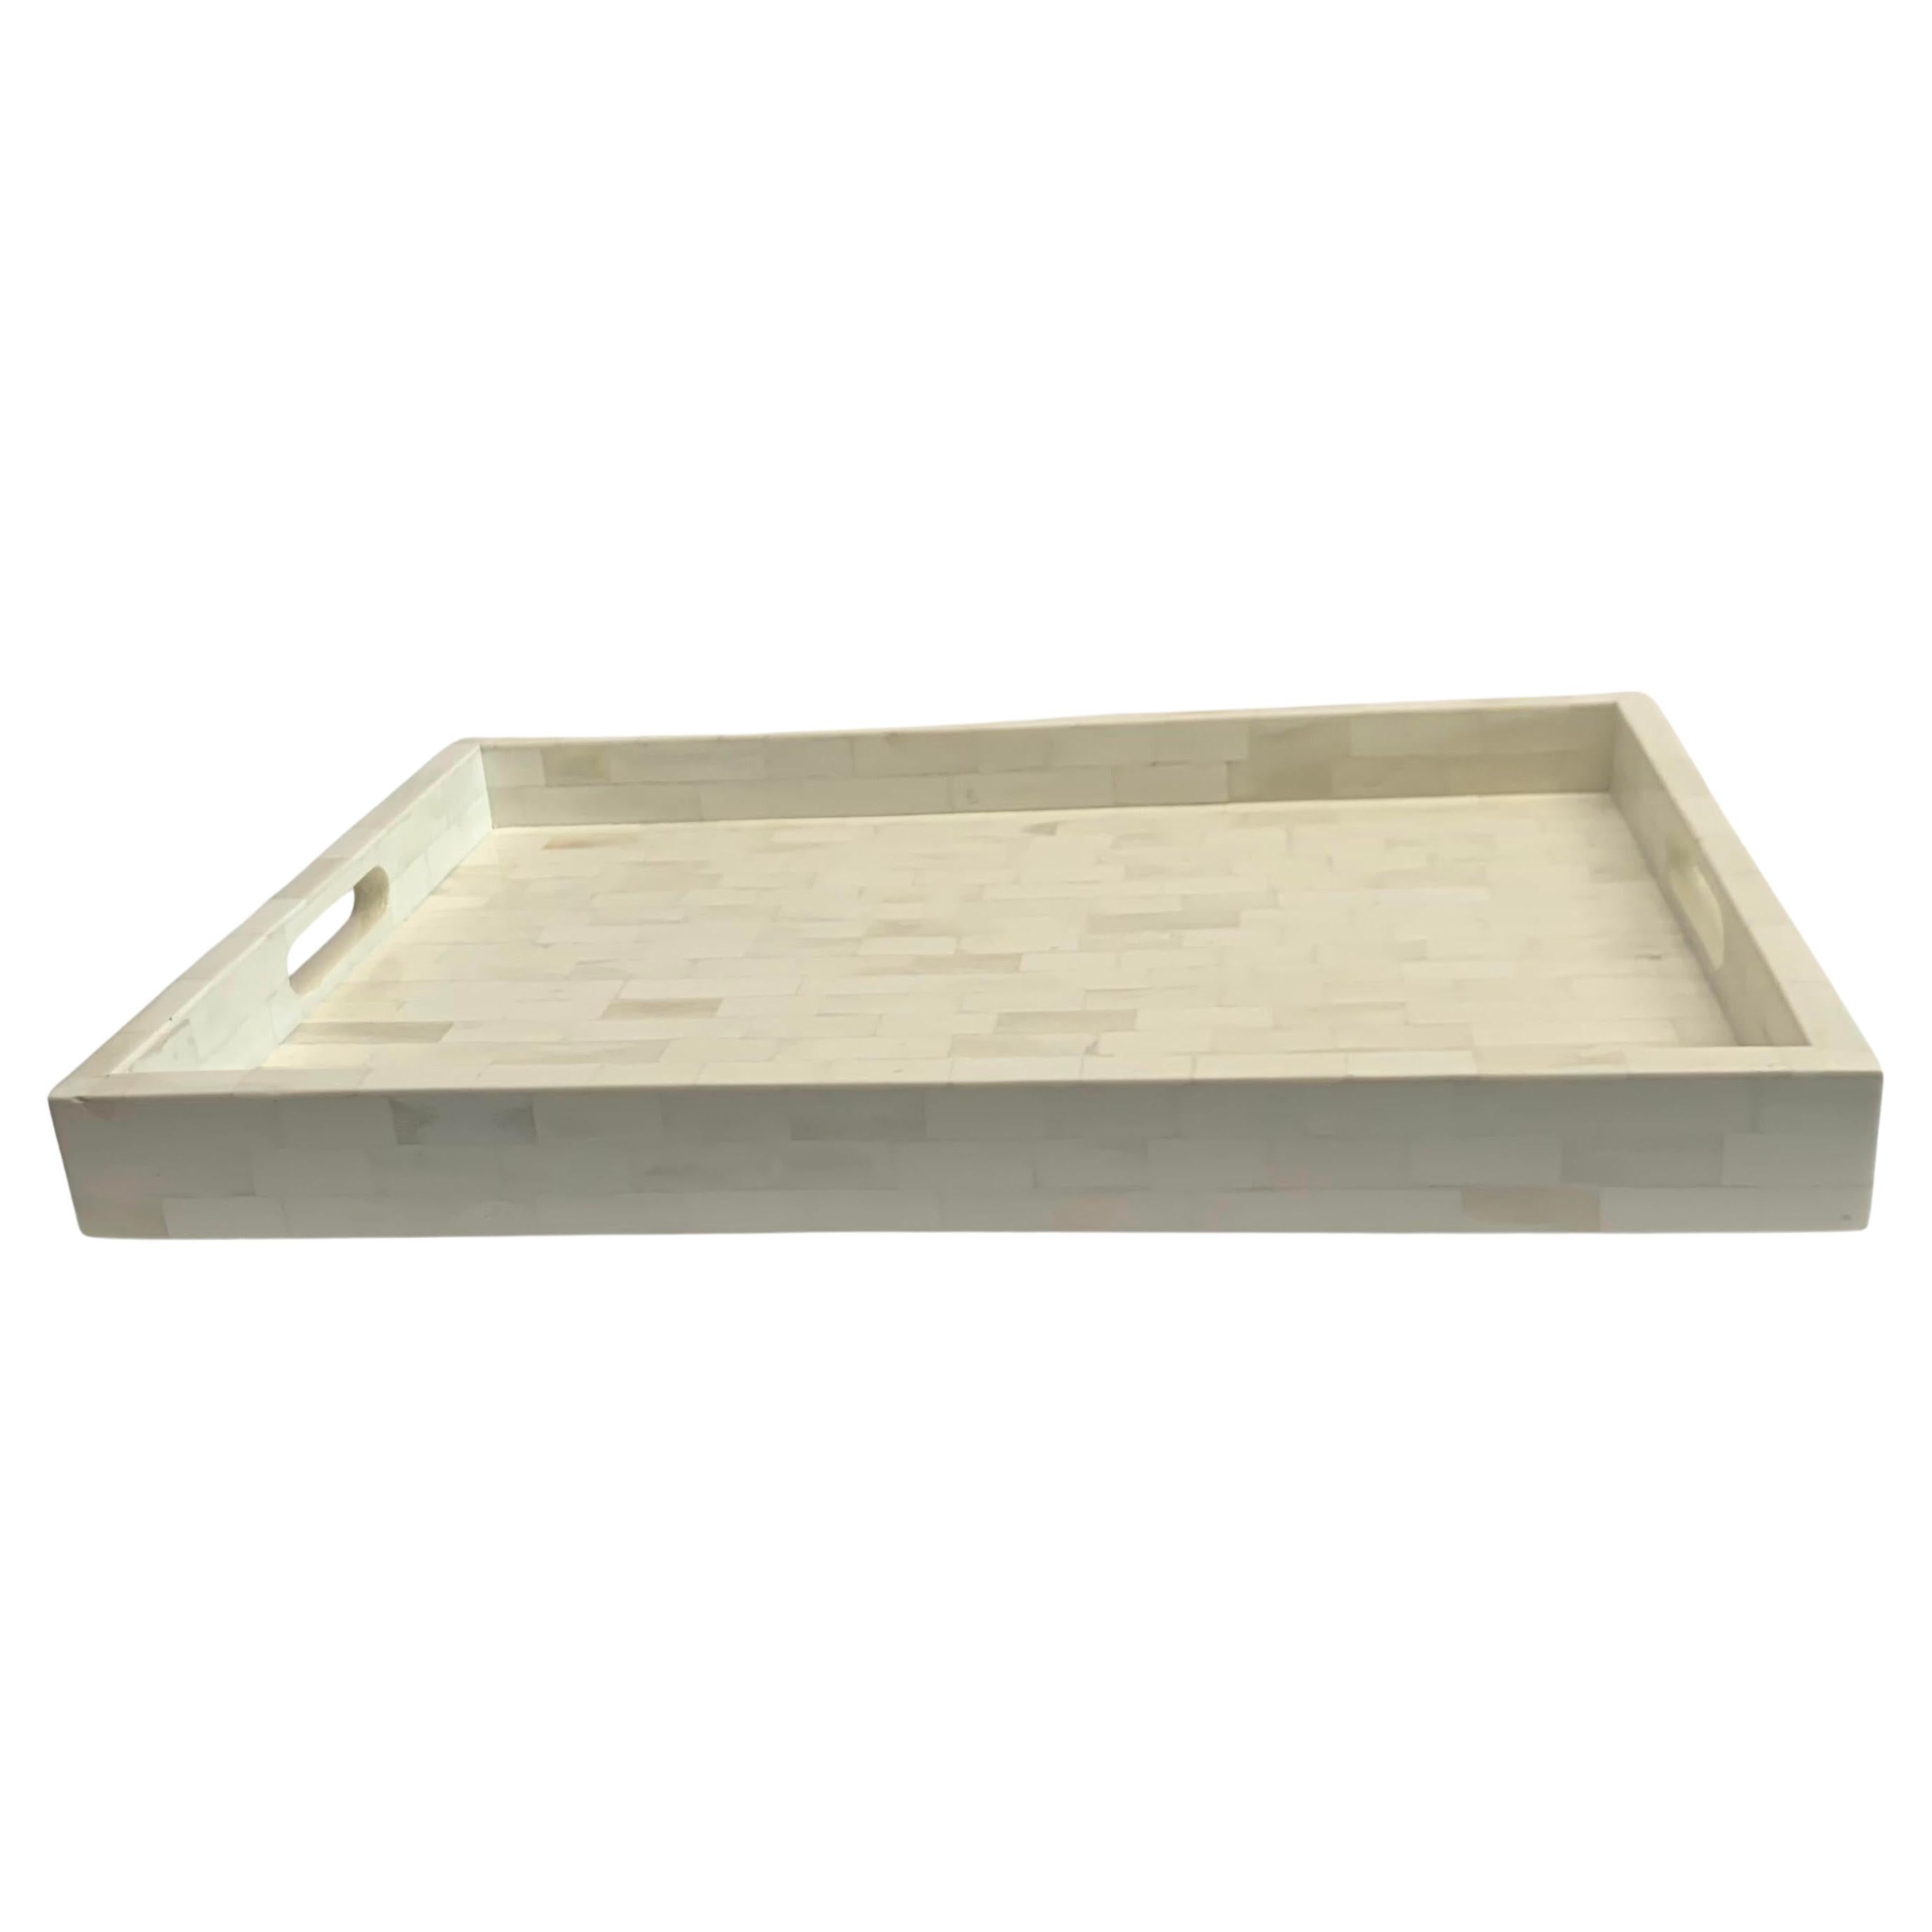 Large Bone Tray With Handles, India, Contemporary